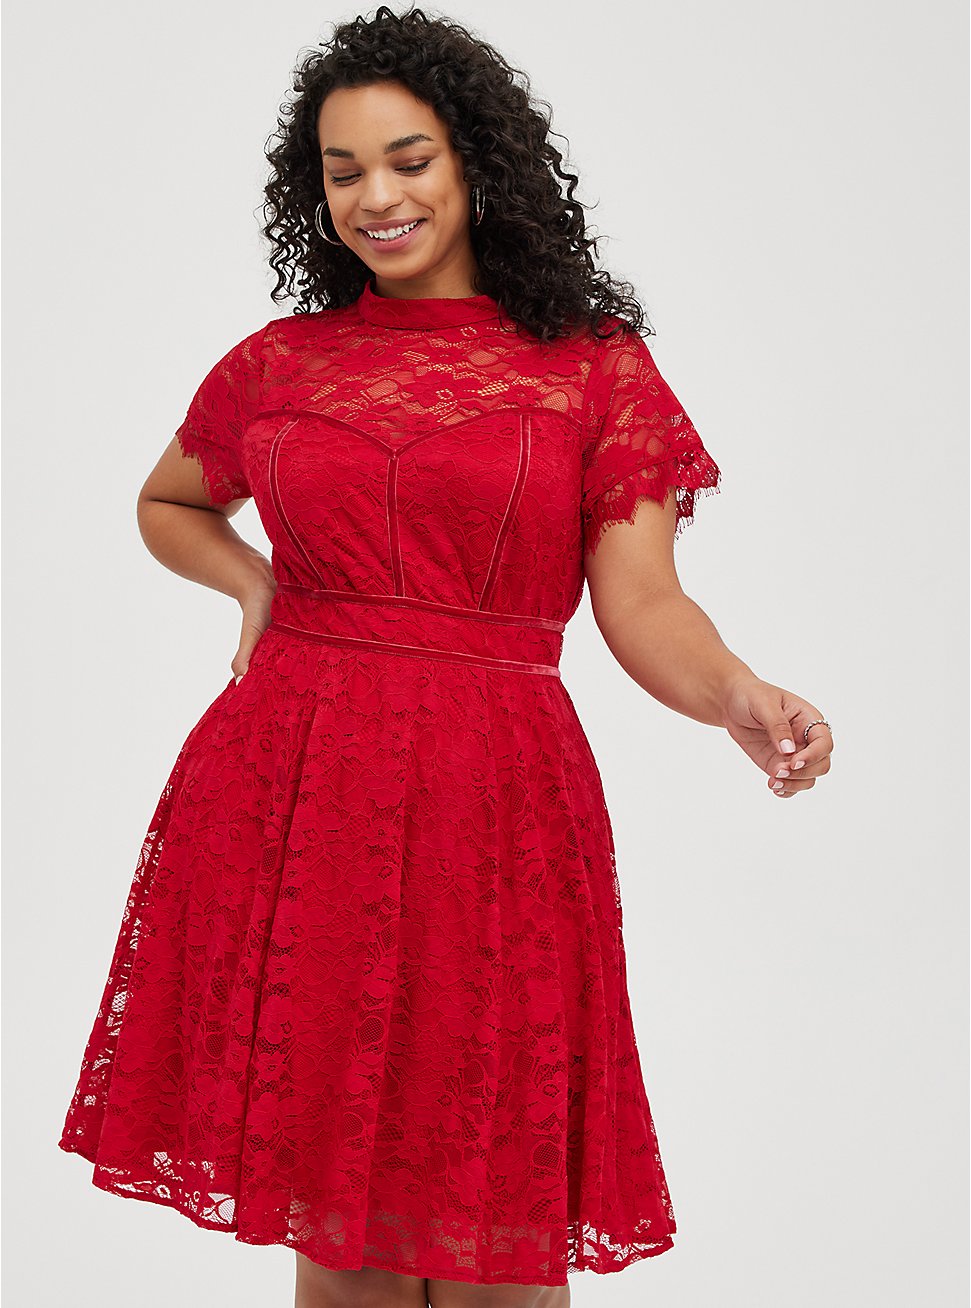 Mock Neck Fit & Flare Mini Dress - Lace Red, JESTER RED, hi-res